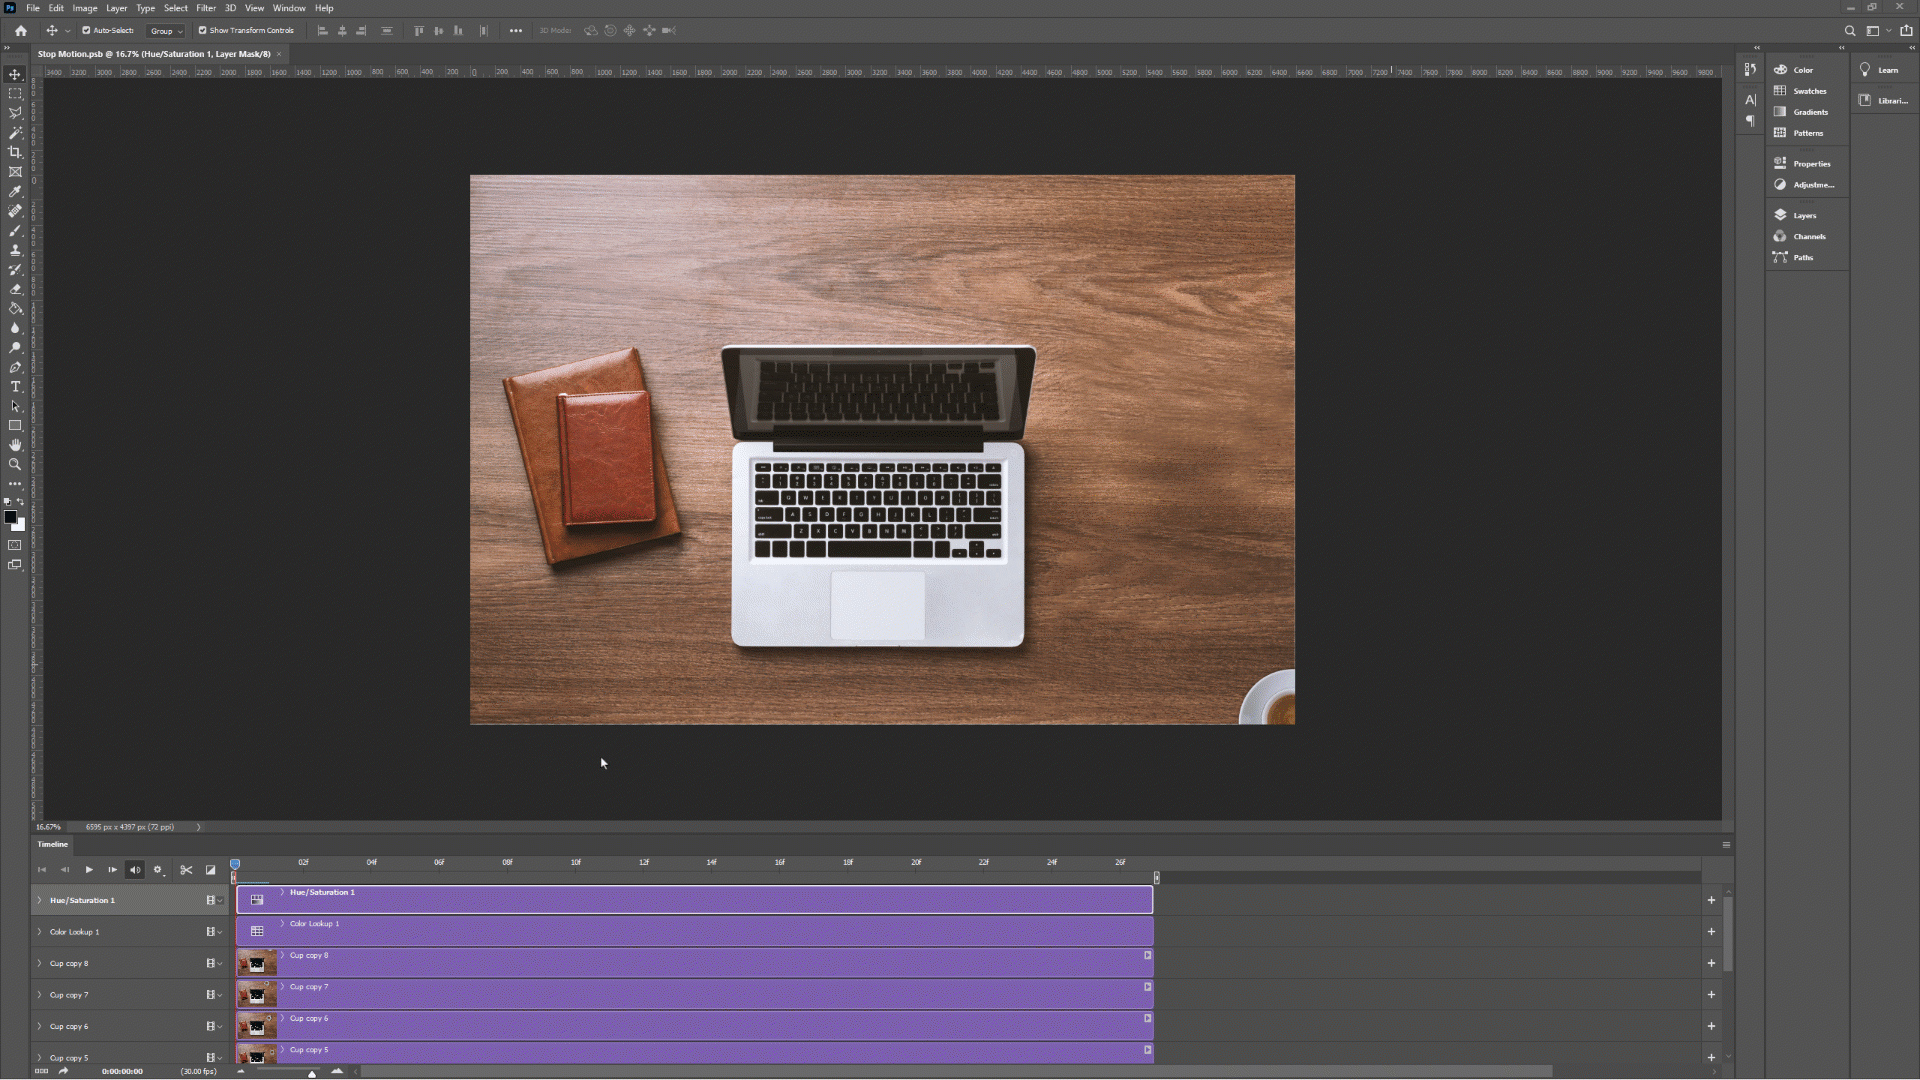 To render the stop motion click on the Option icon at the top of the Timeline panel and choose the “Render Video” option.